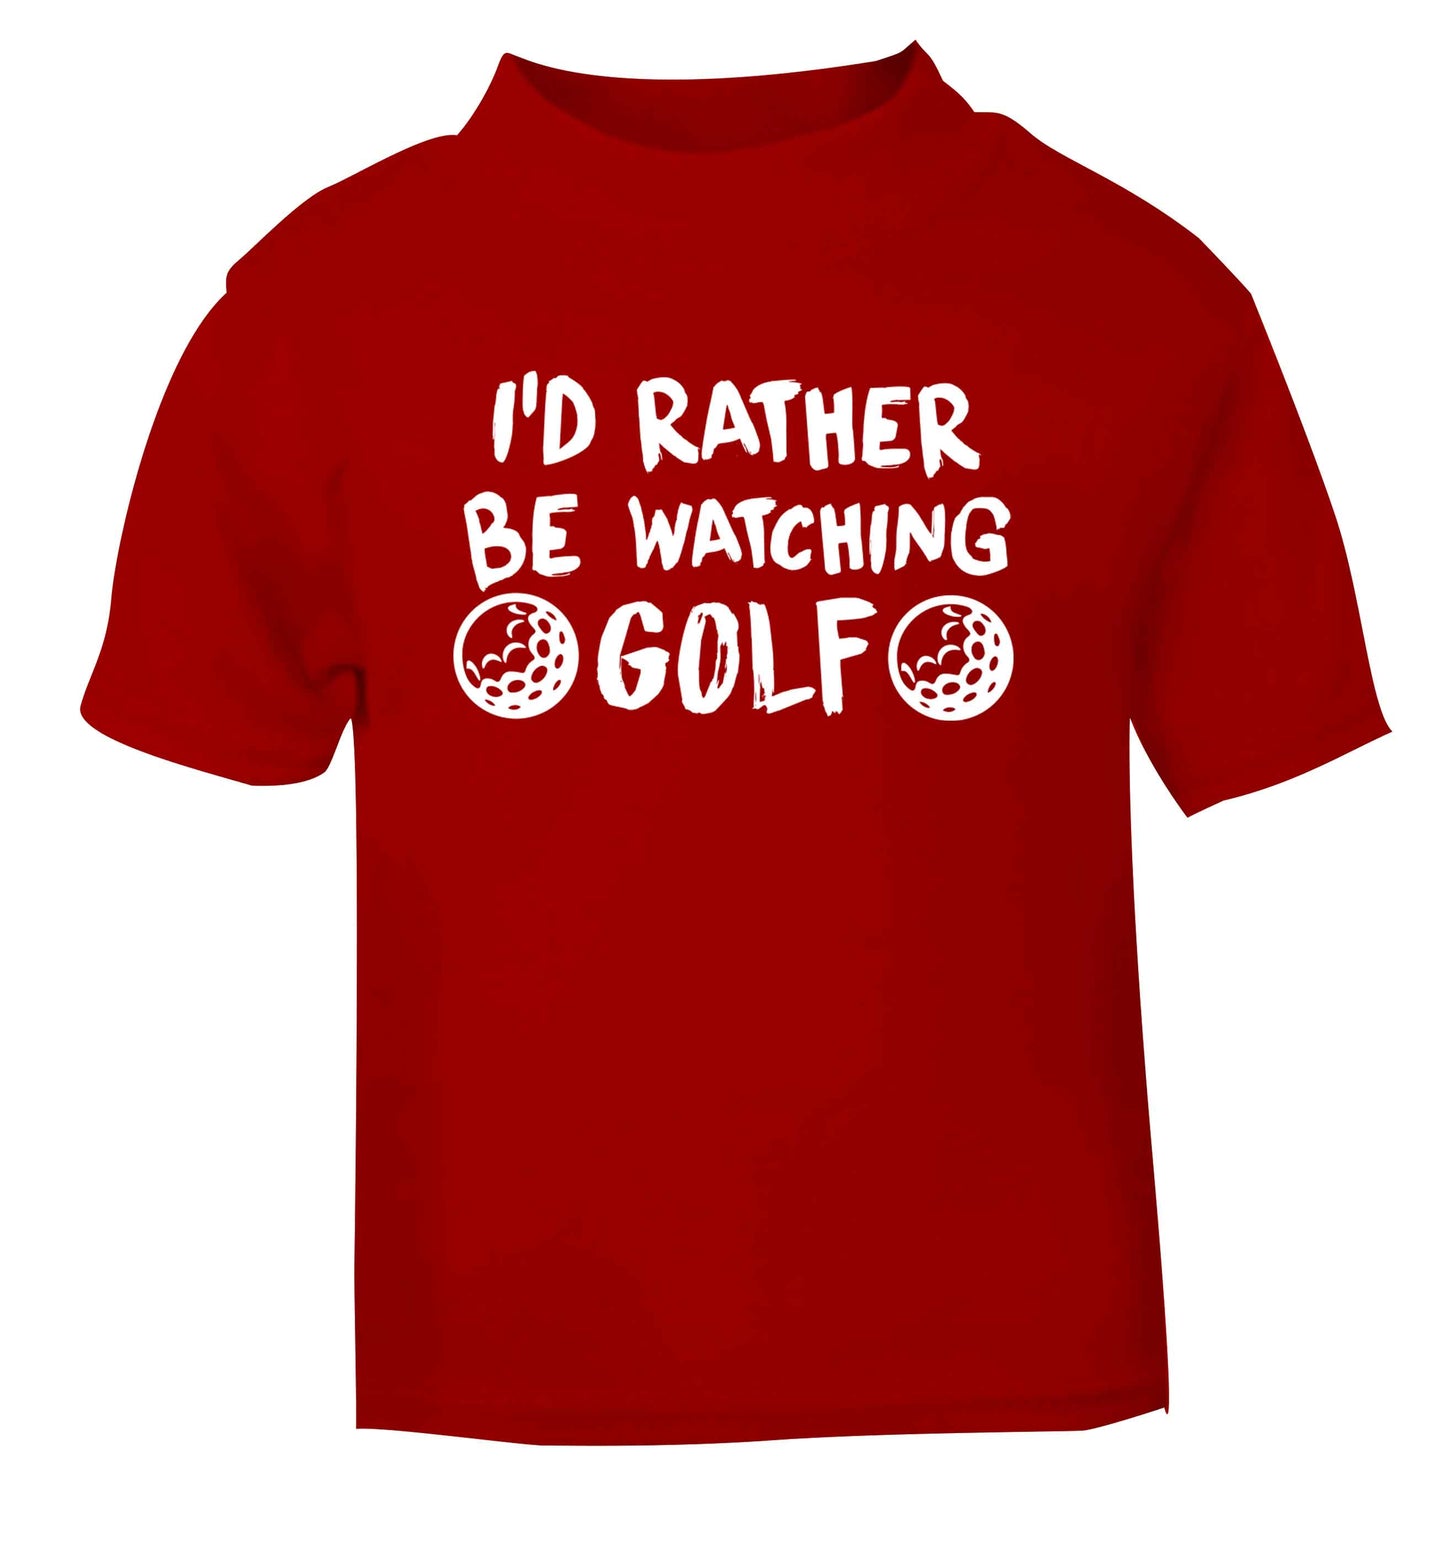 I'd rather be watching golf red Baby Toddler Tshirt 2 Years